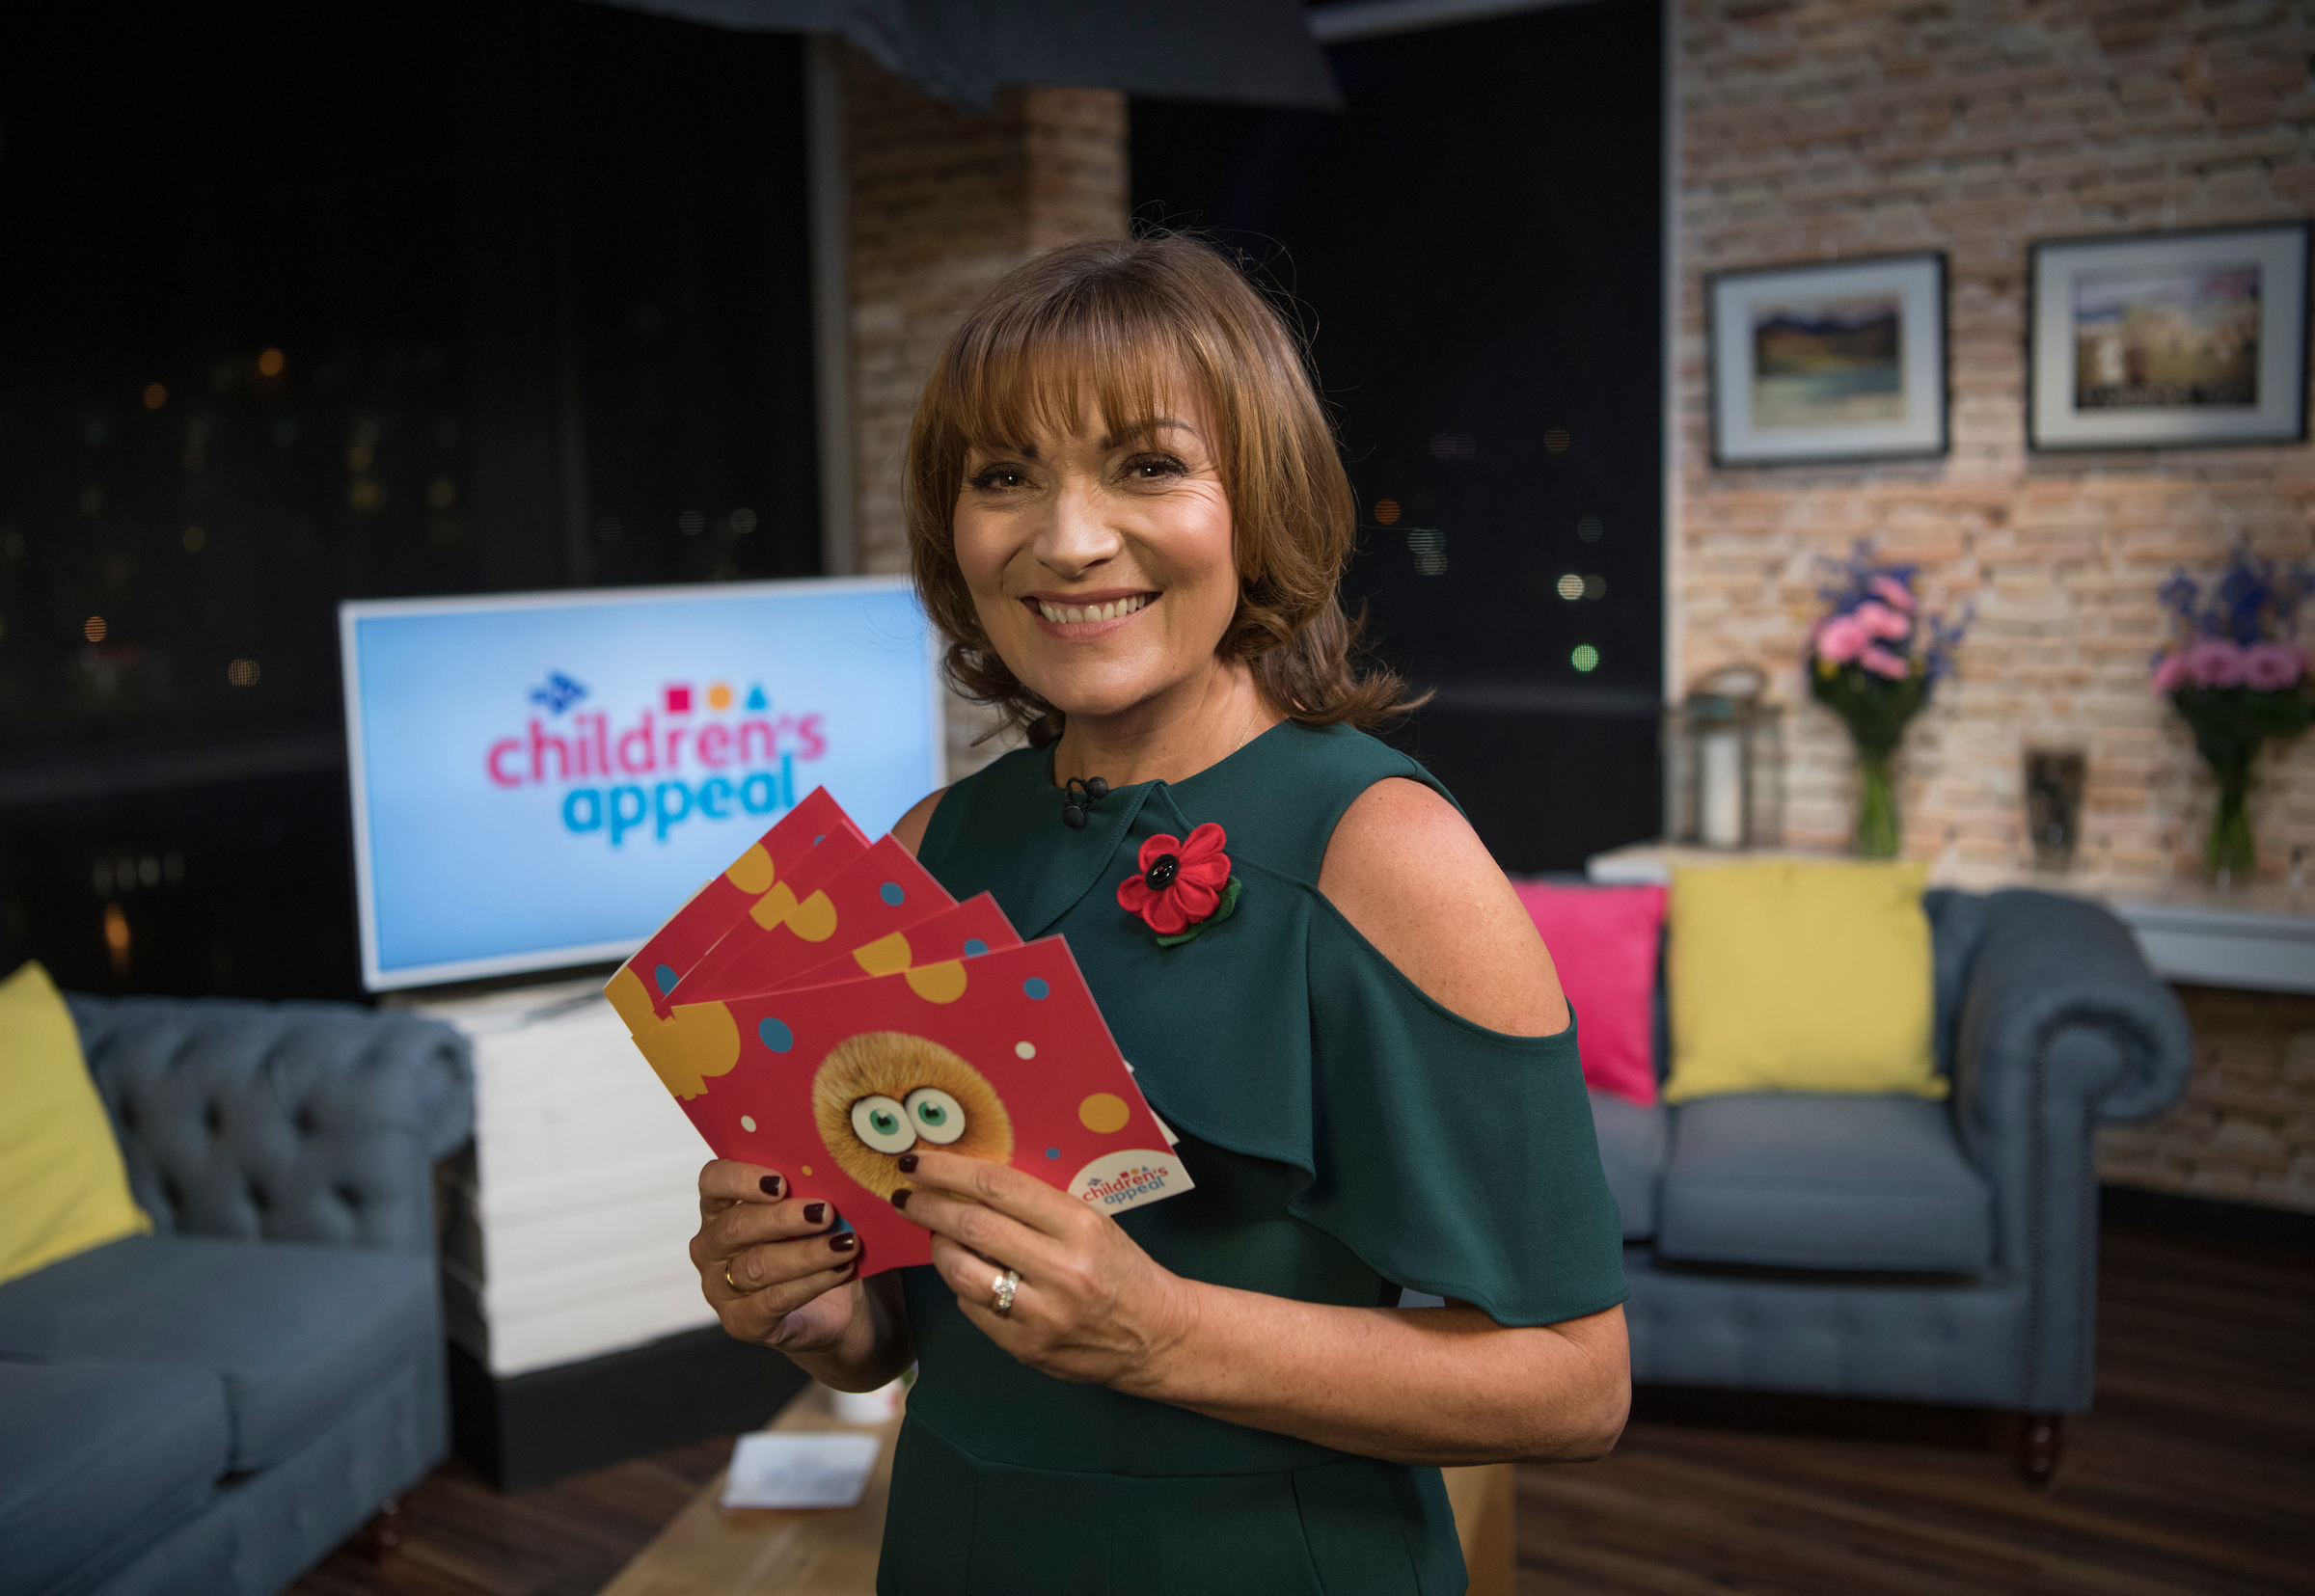 Lorraine Kelly, a trustee of the STV Children's Appeal during the live show, as a fundraising drive has raised more than £2.6 million for children and young people in Scotland. (Graeme Hunter/STV/PA Wire)